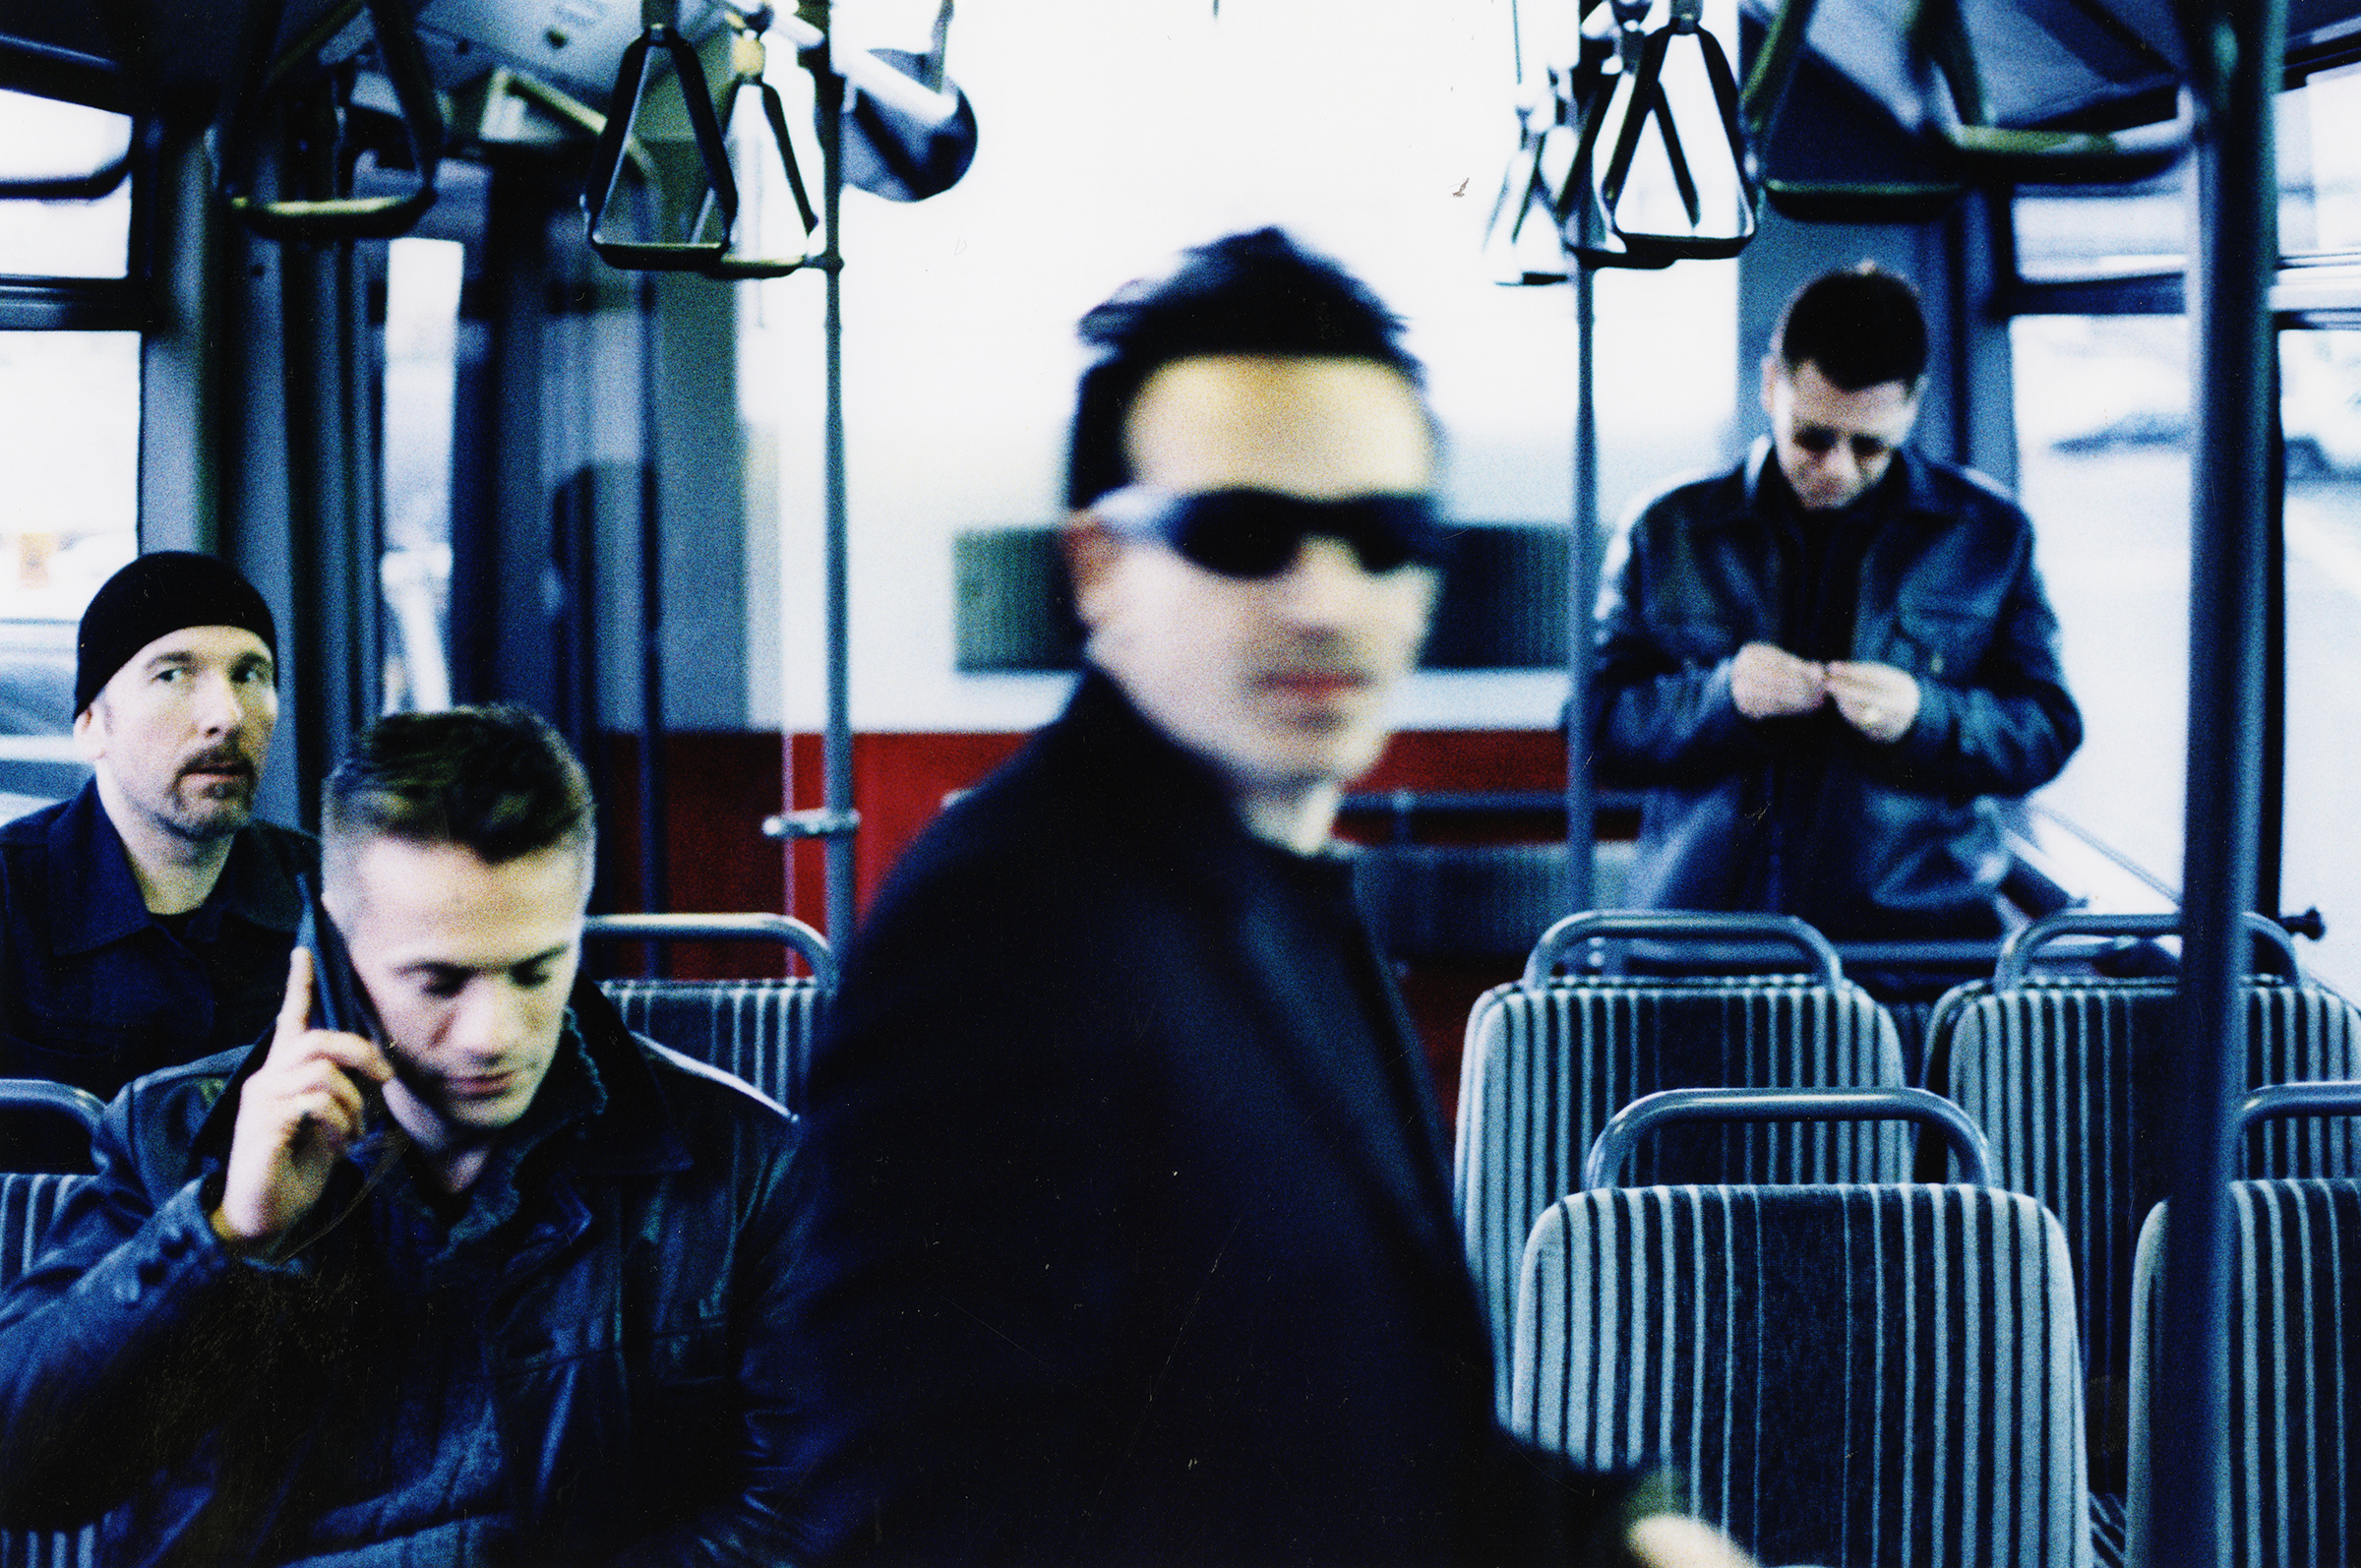 U2 announce ALL THAT YOU CANT LEAVE BEHIND - 20th anniversary reissue 2